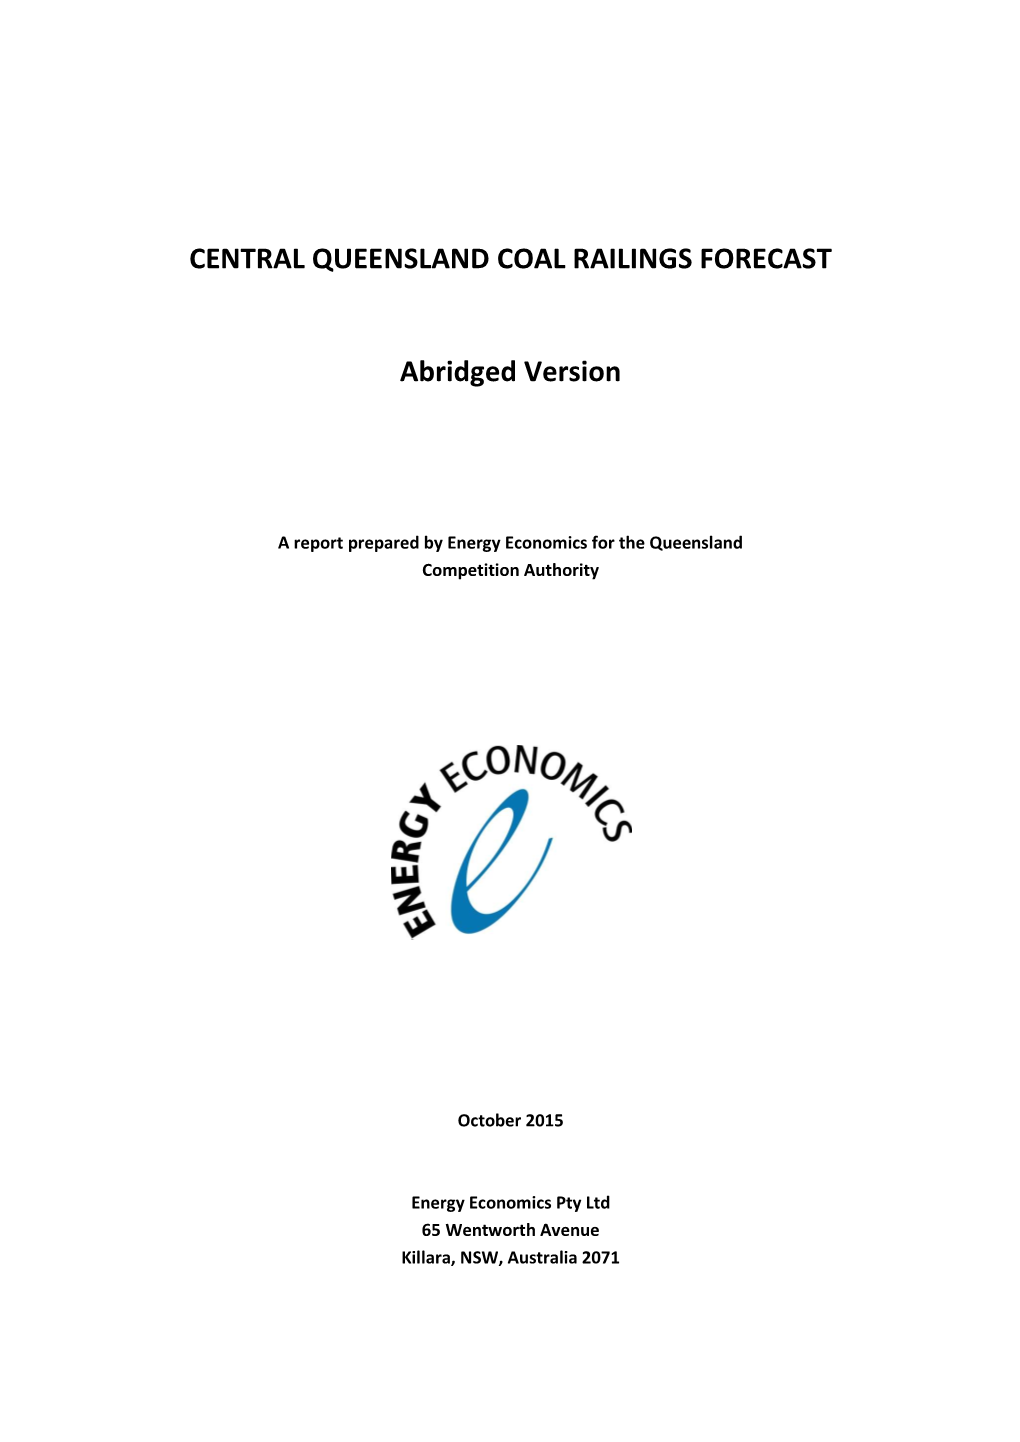 Energy Economics for the Queensland Competition Authority